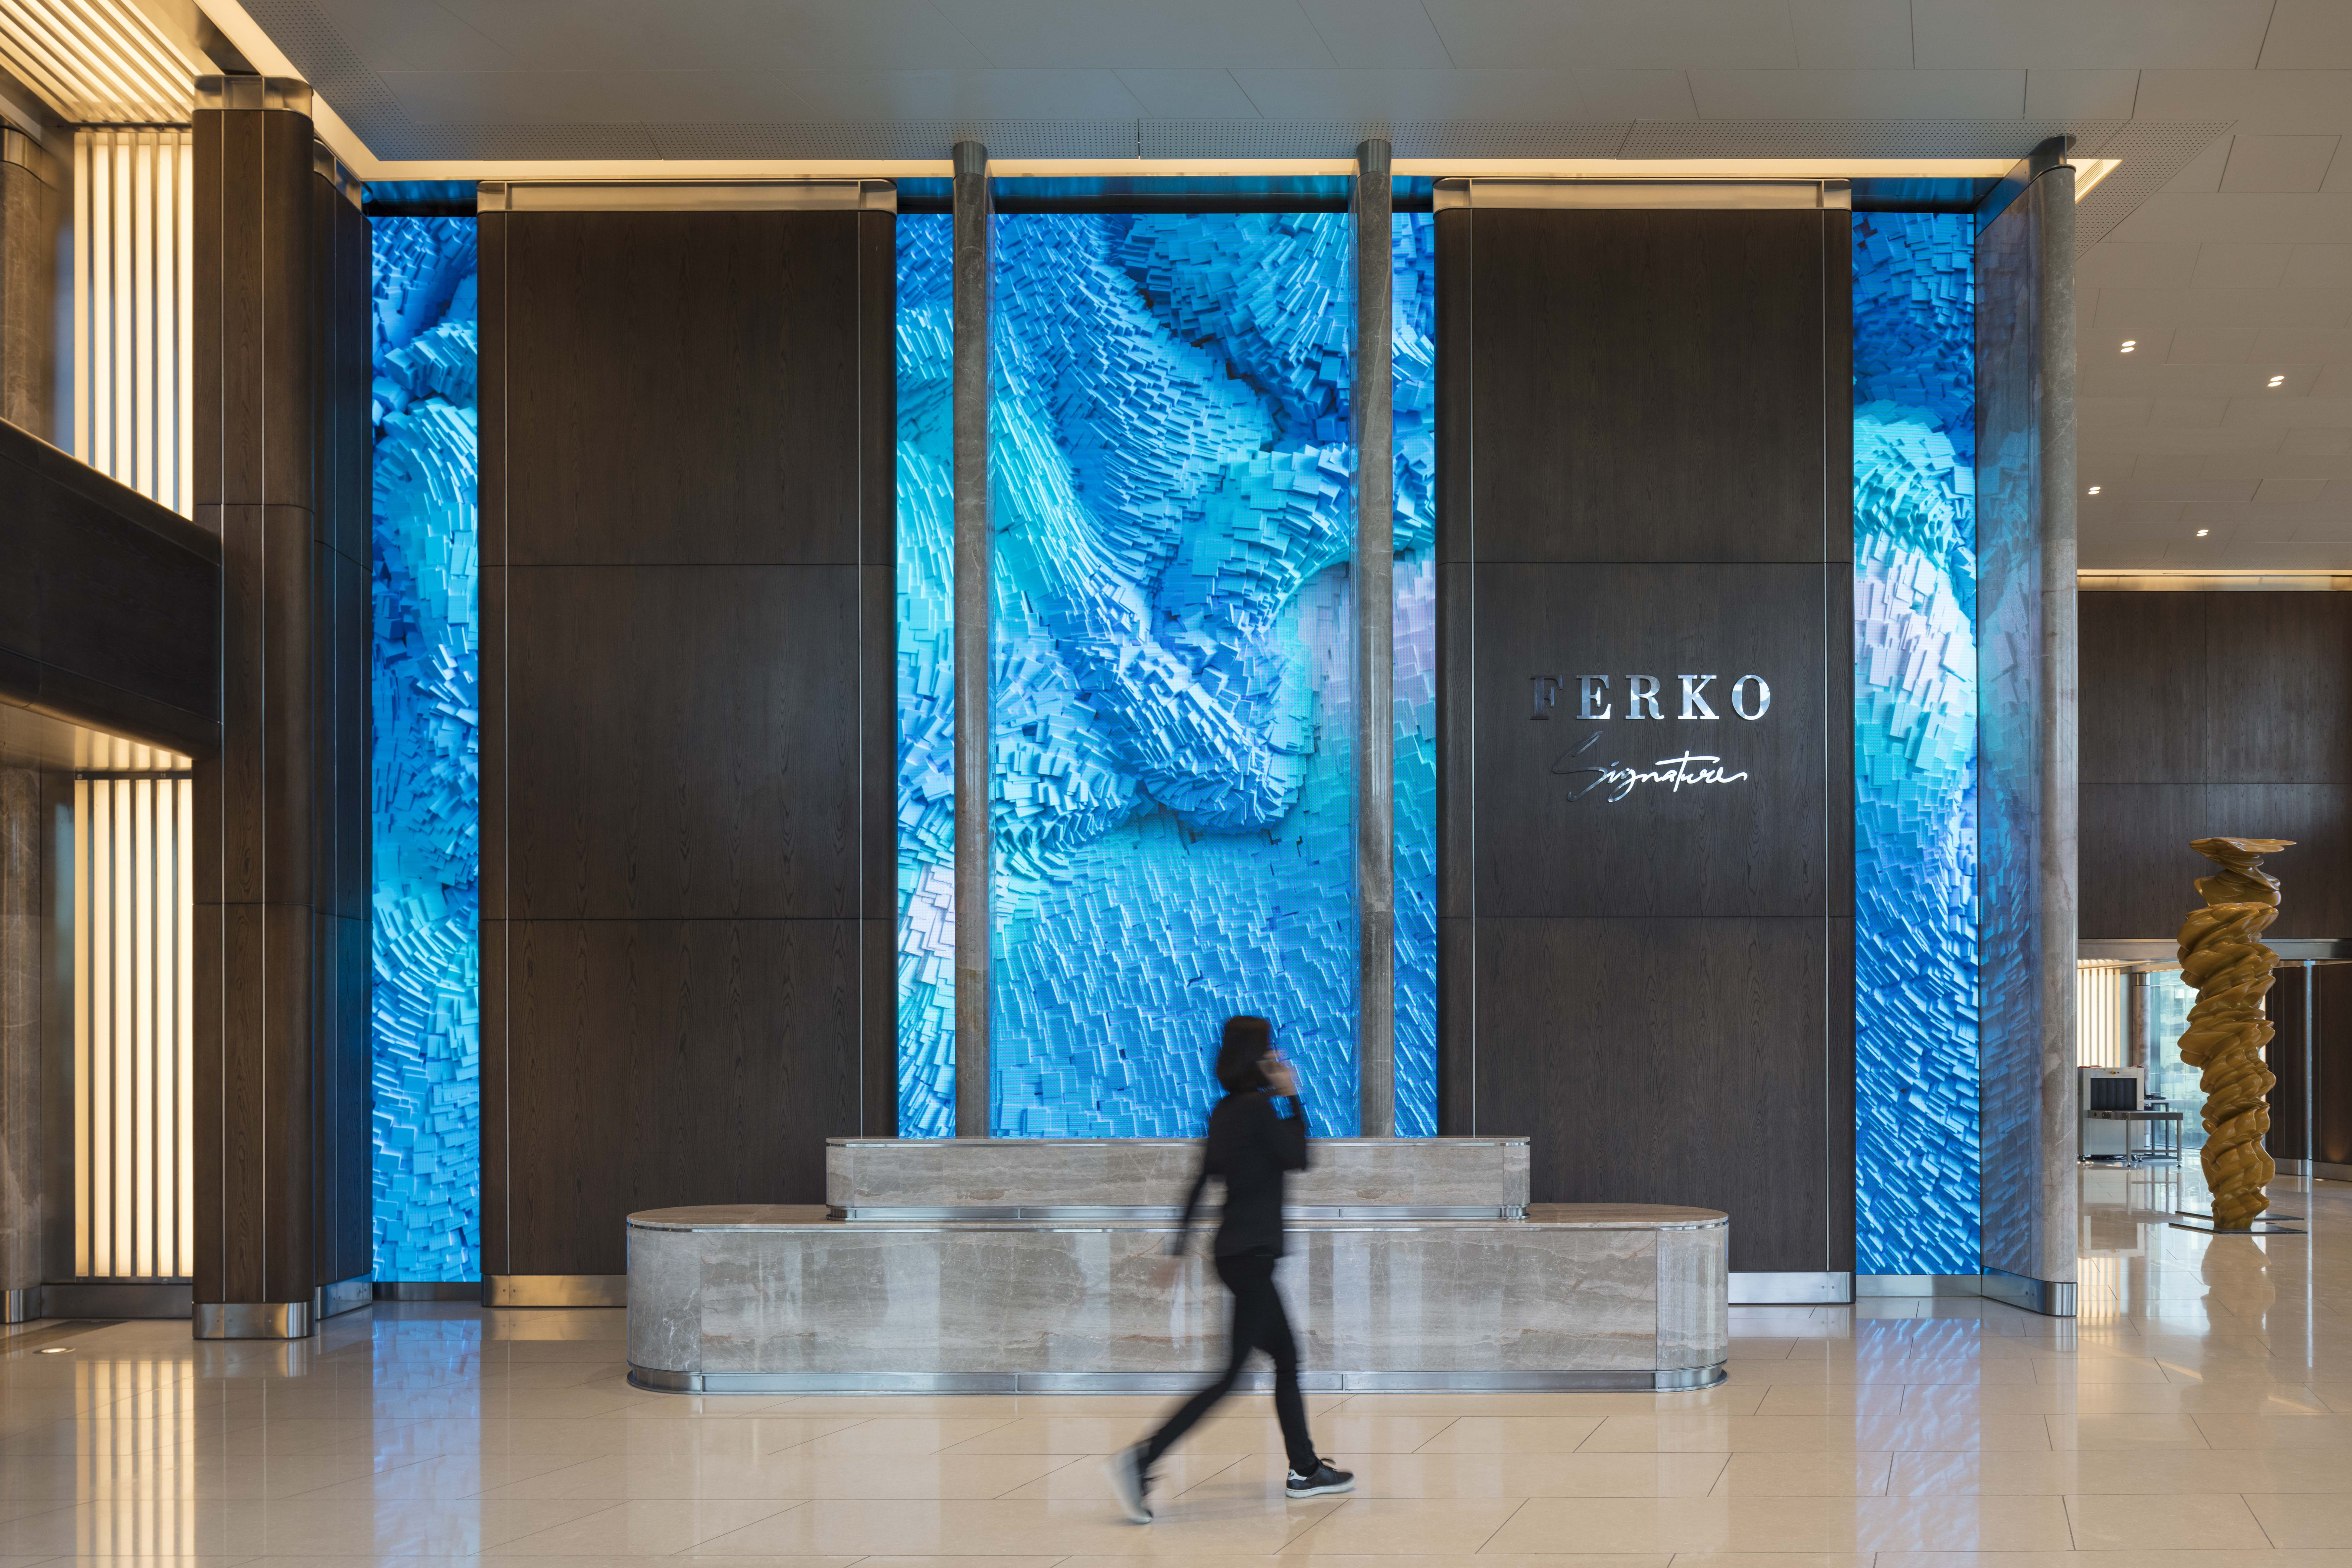 Ferko Signature hotel's reception features a unique digital painting, the living image uses data from the movement of the wind